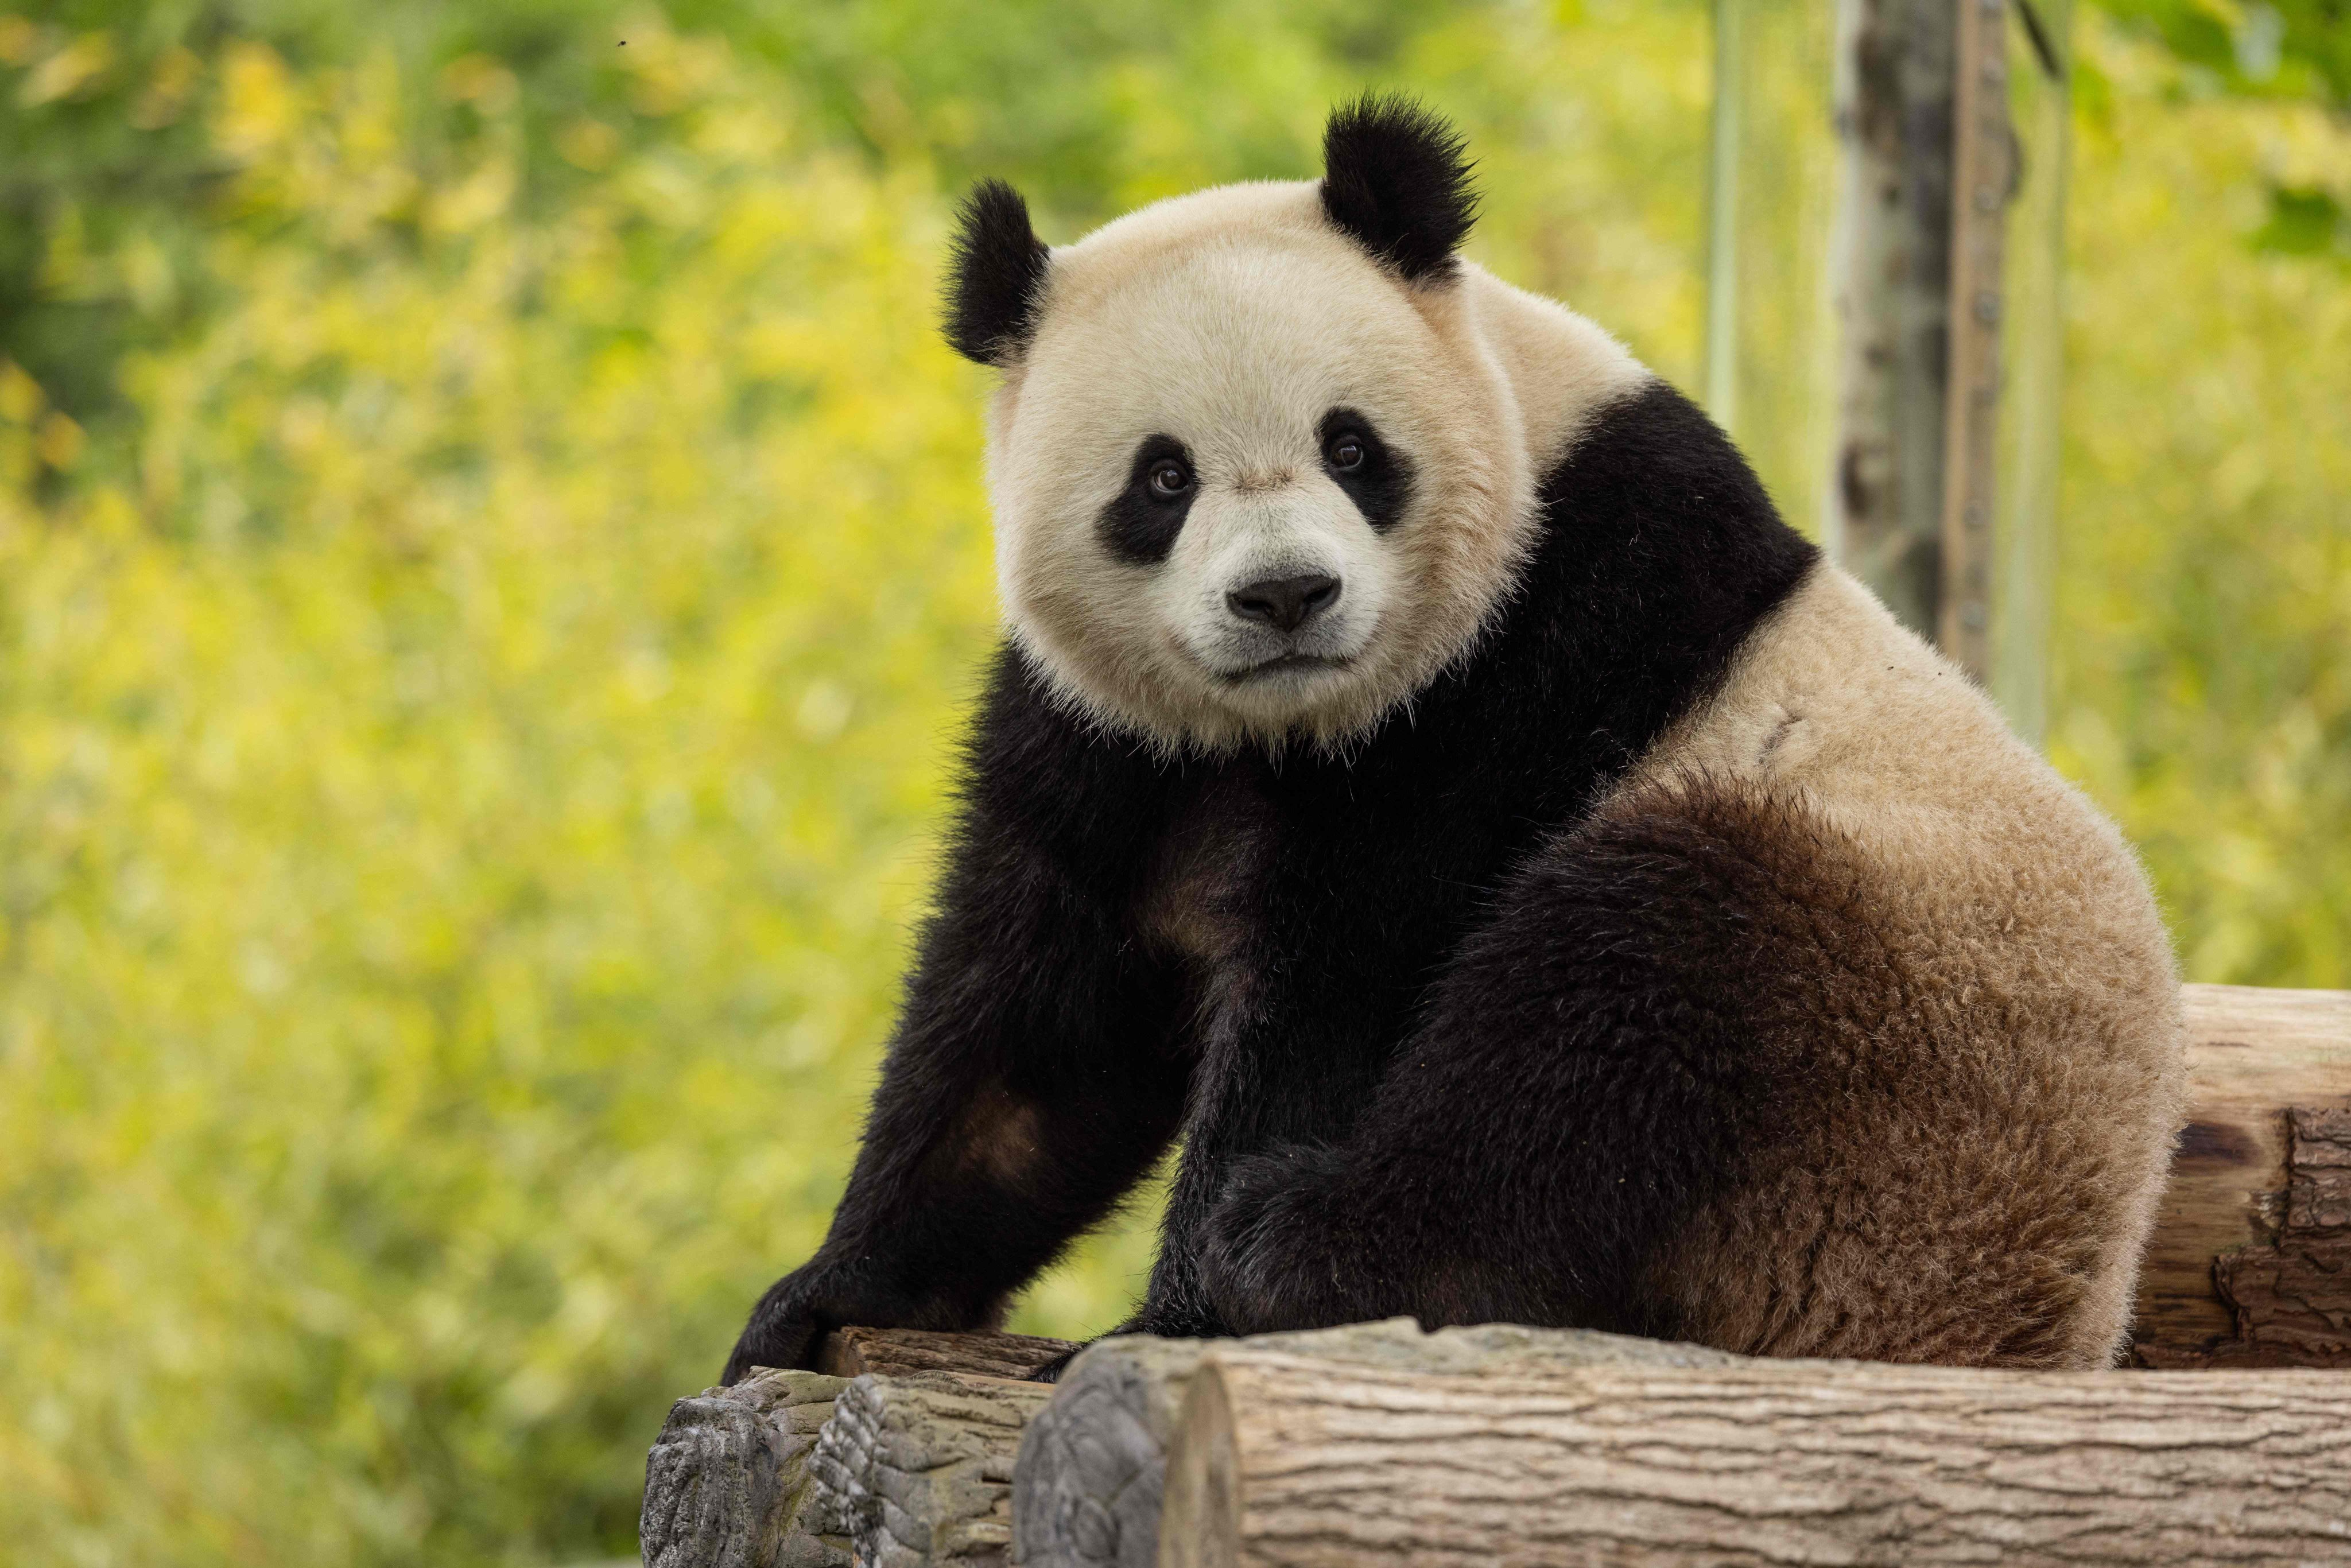 Two-year-old giant panda Bao Li is seen in his habitat at Shenshuping Base in Wolong, China. He and prospective mate Qing Bao will be sent to the US by the end of the year, officials have said. Photo: Roshan Patel, Smithsonian’s National Zoo and Conservation Biology Institute via AFP